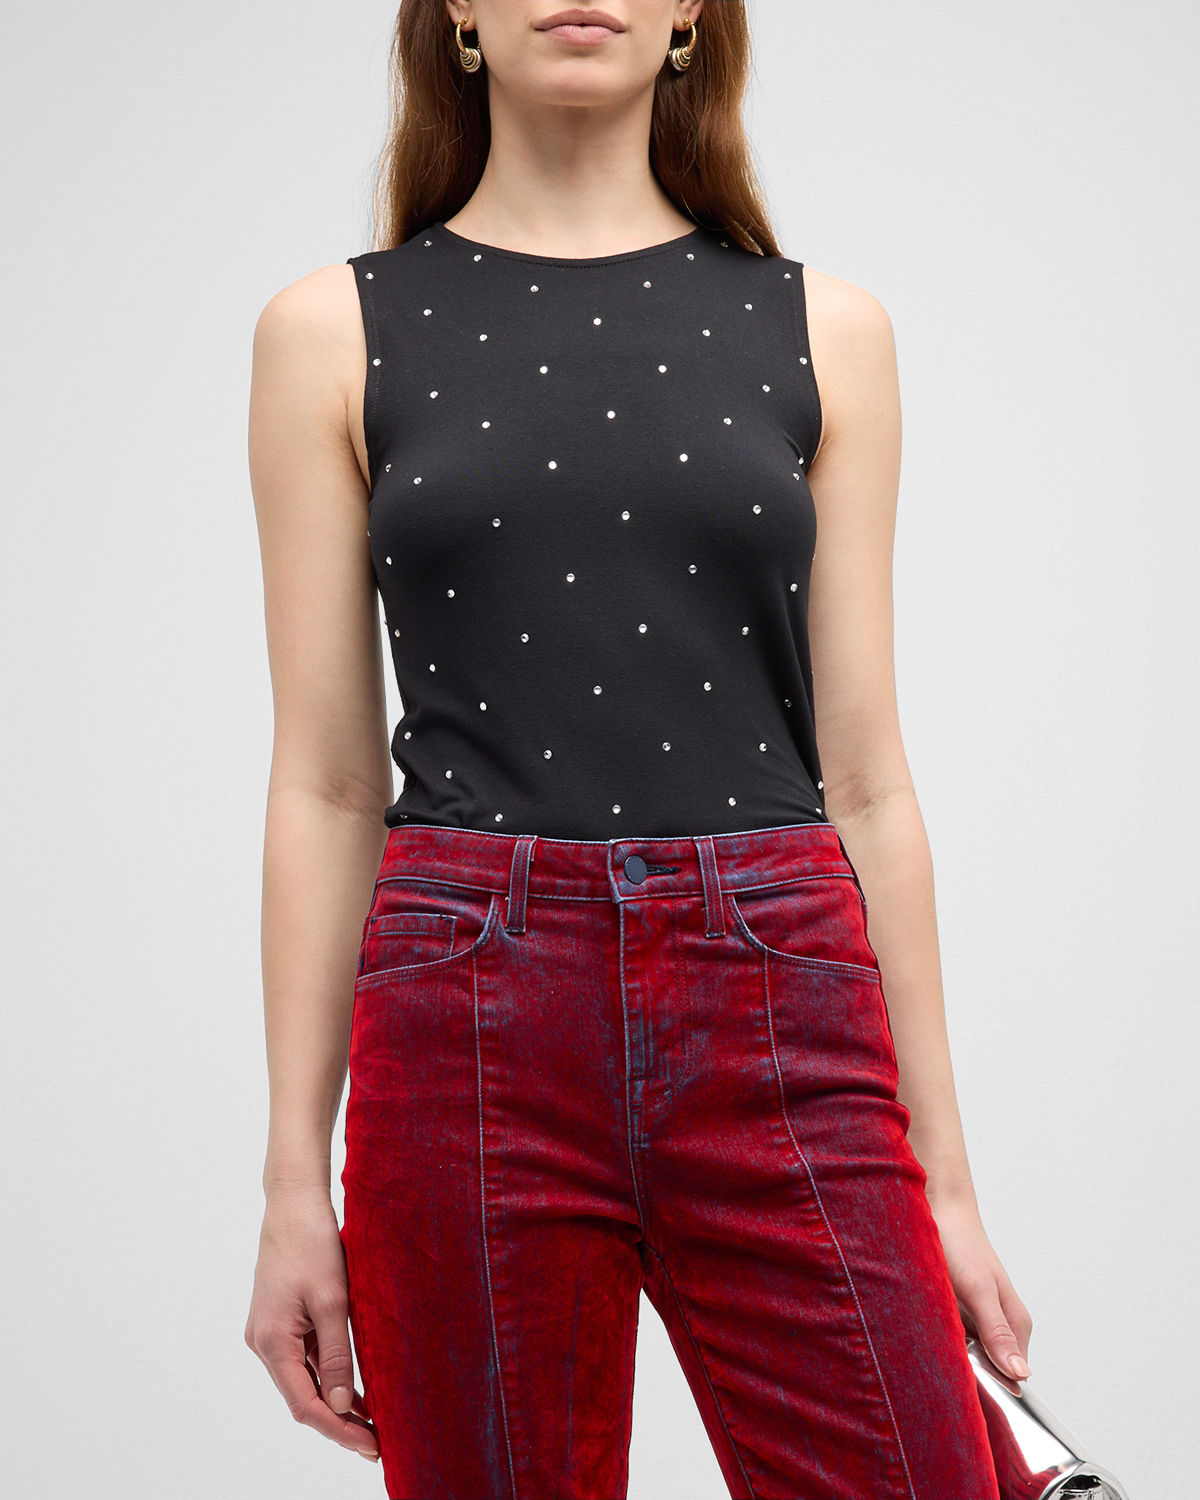 L AGENCE SHELLY KNIT EMBROIDERED TANK TOP